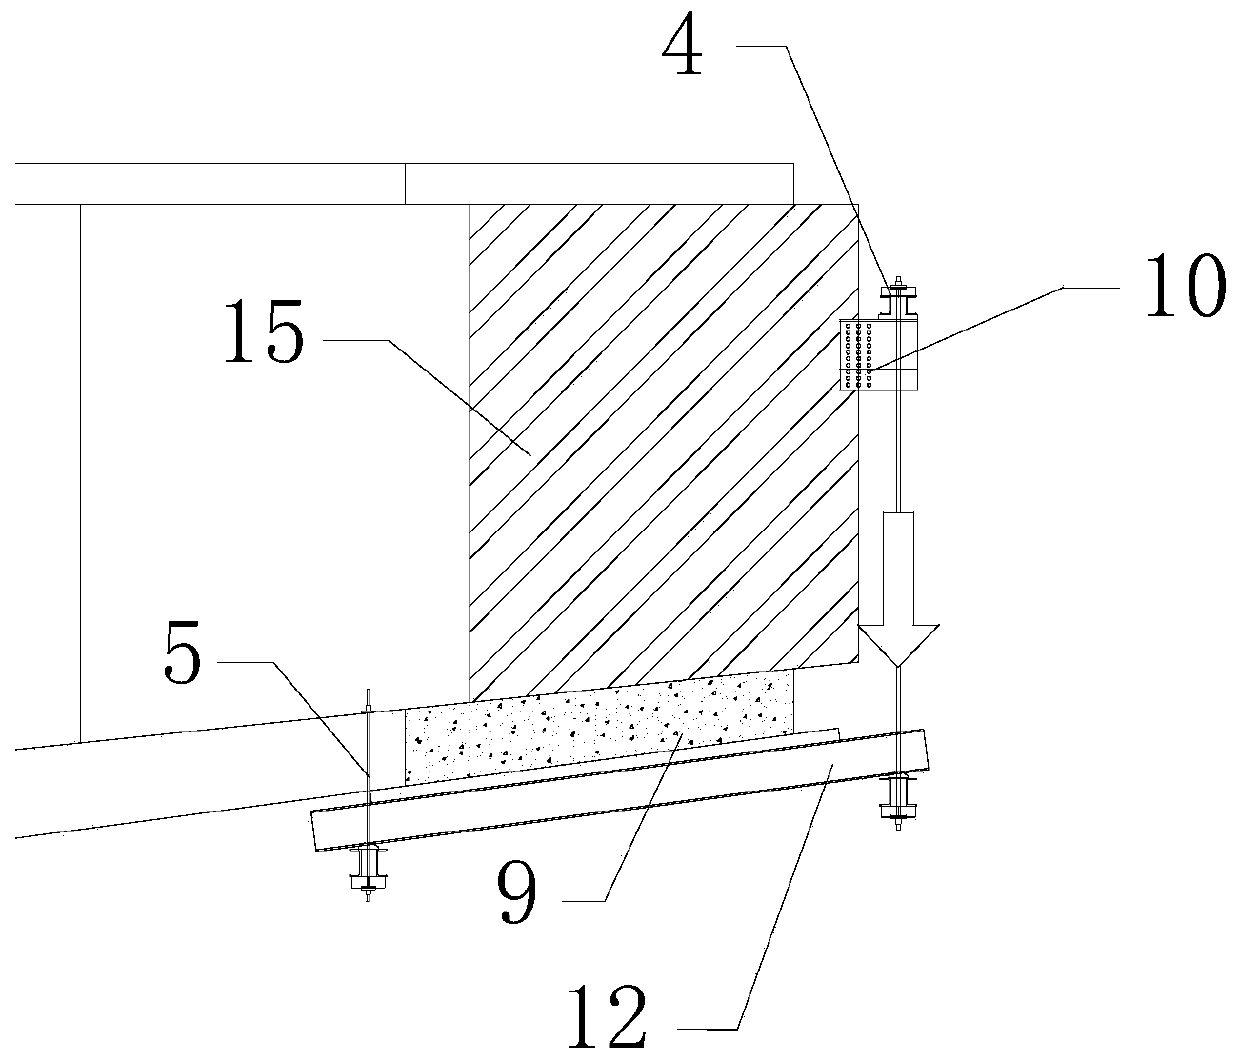 Cantilever construction method for bearing part of bottom plate weight by utilizing corrugated steel webs